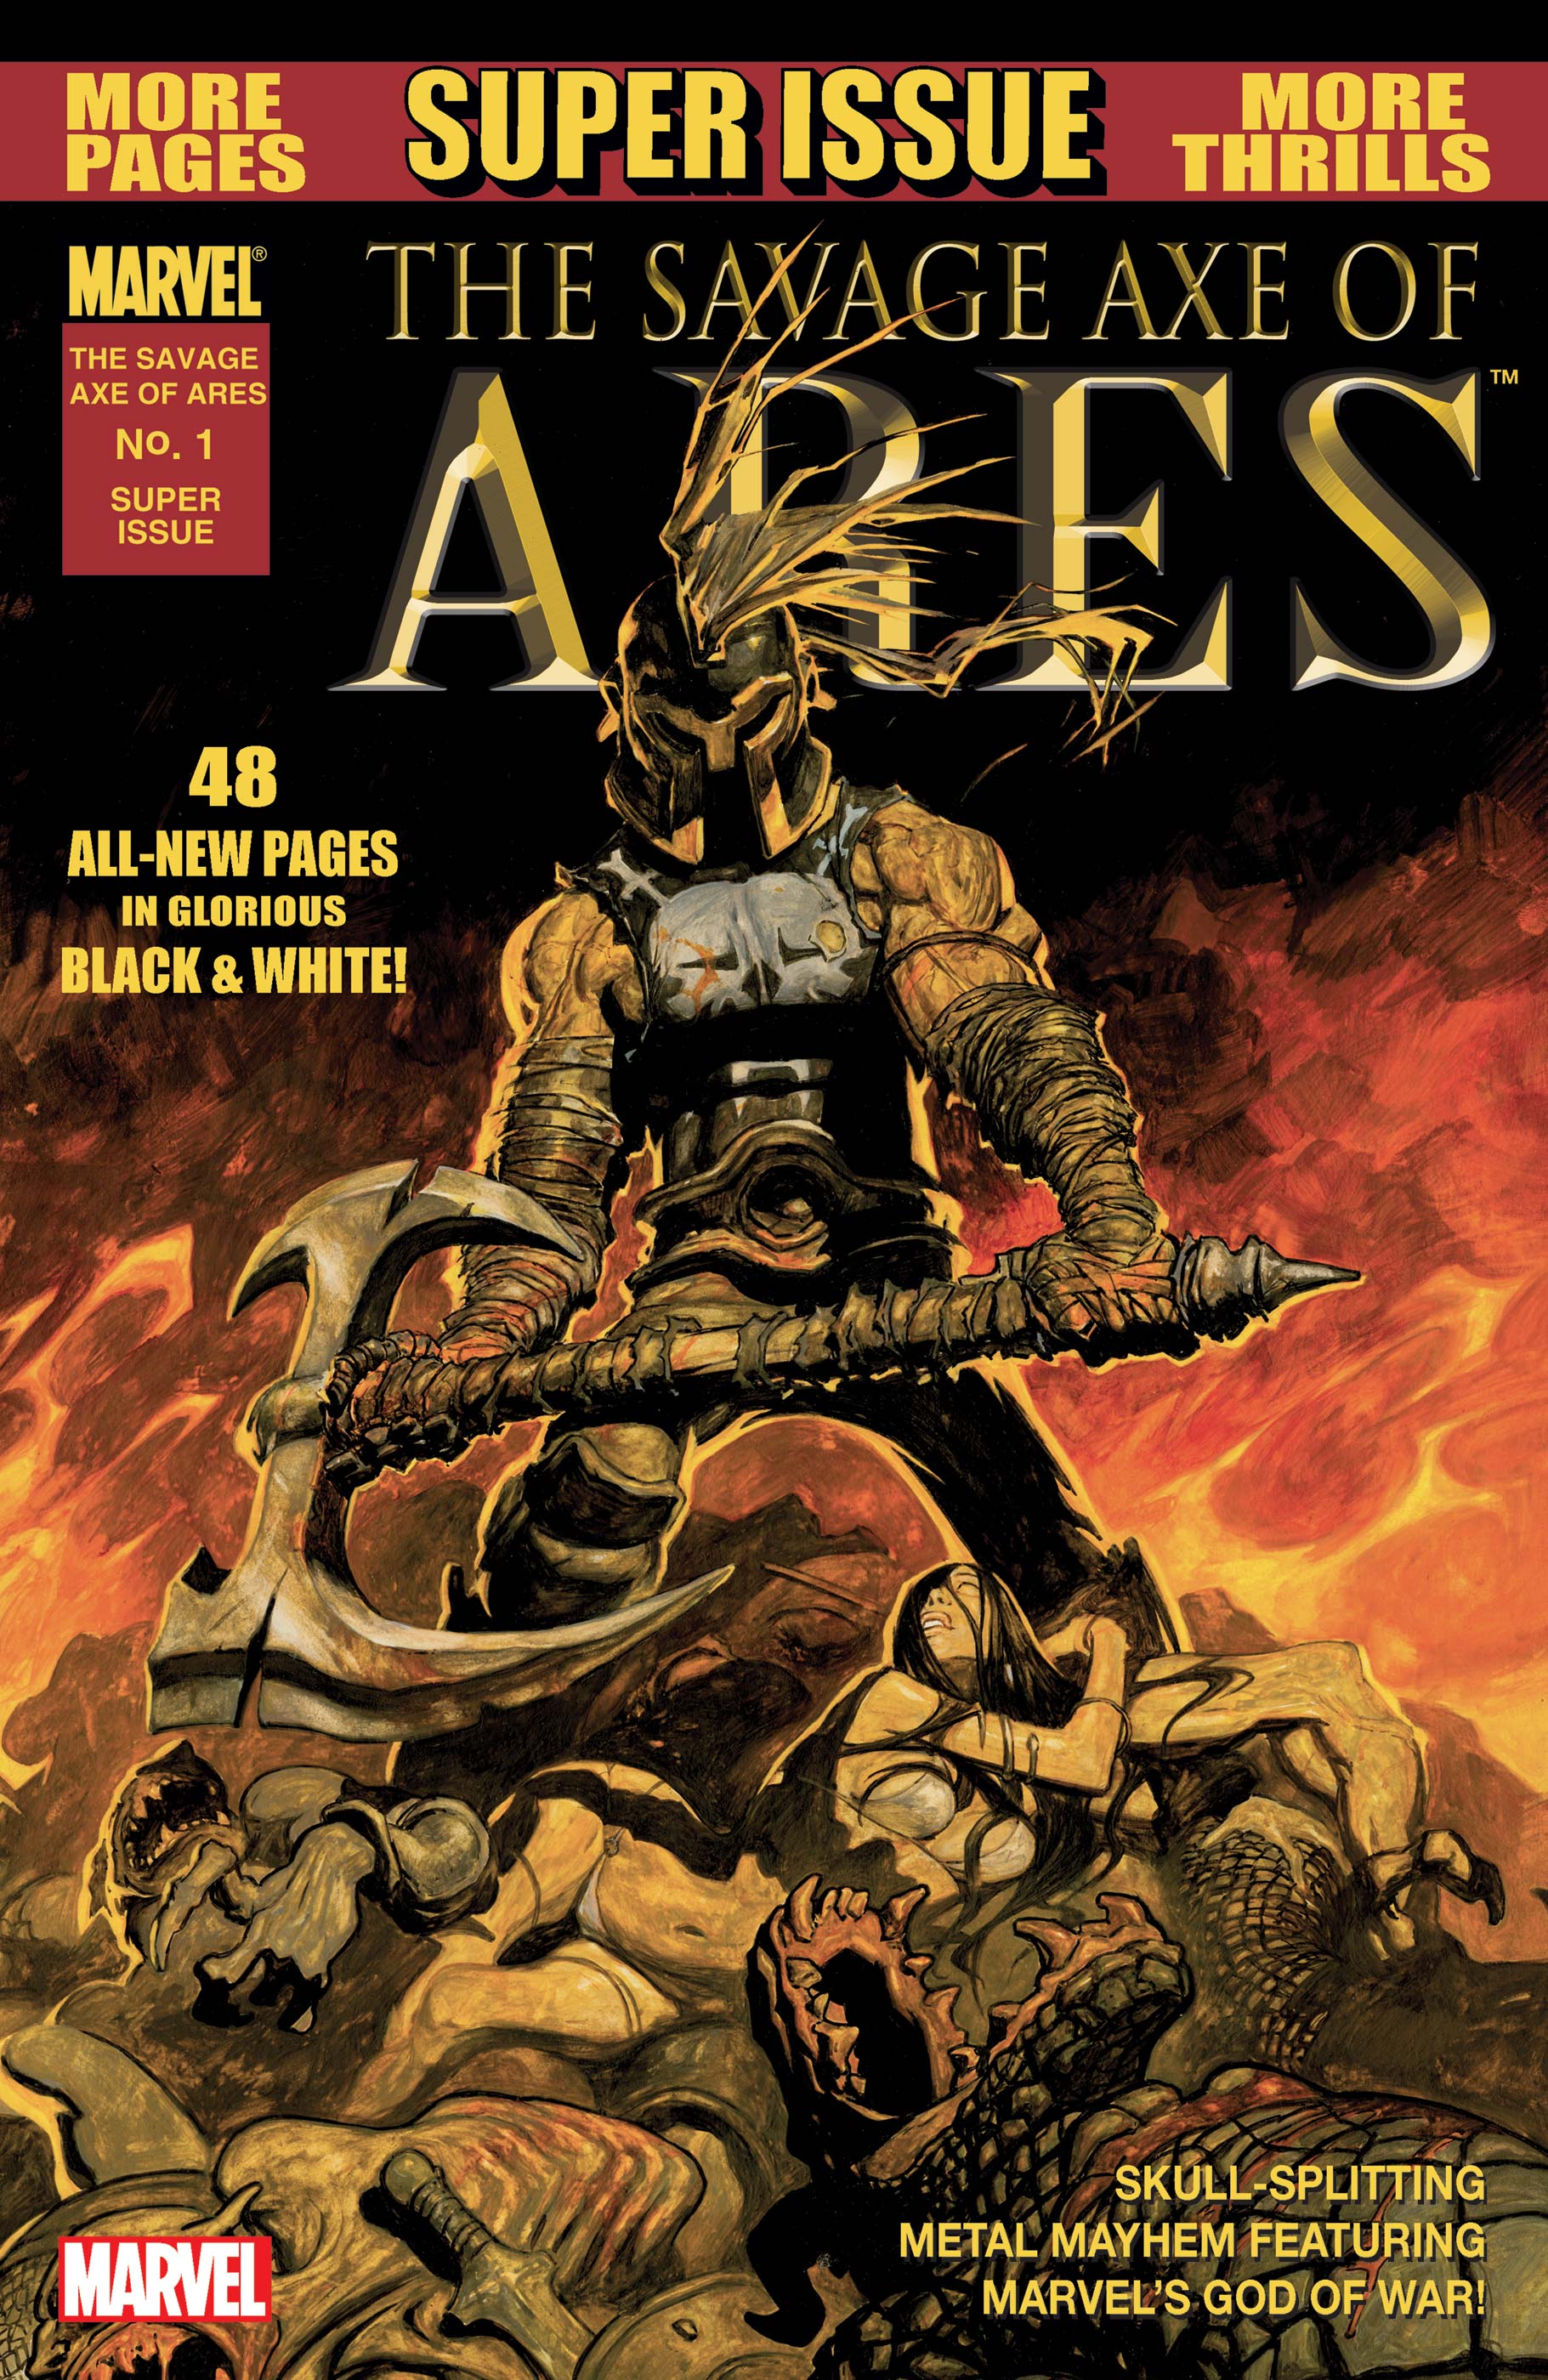 The Savage Axe of Ares (2010) #1